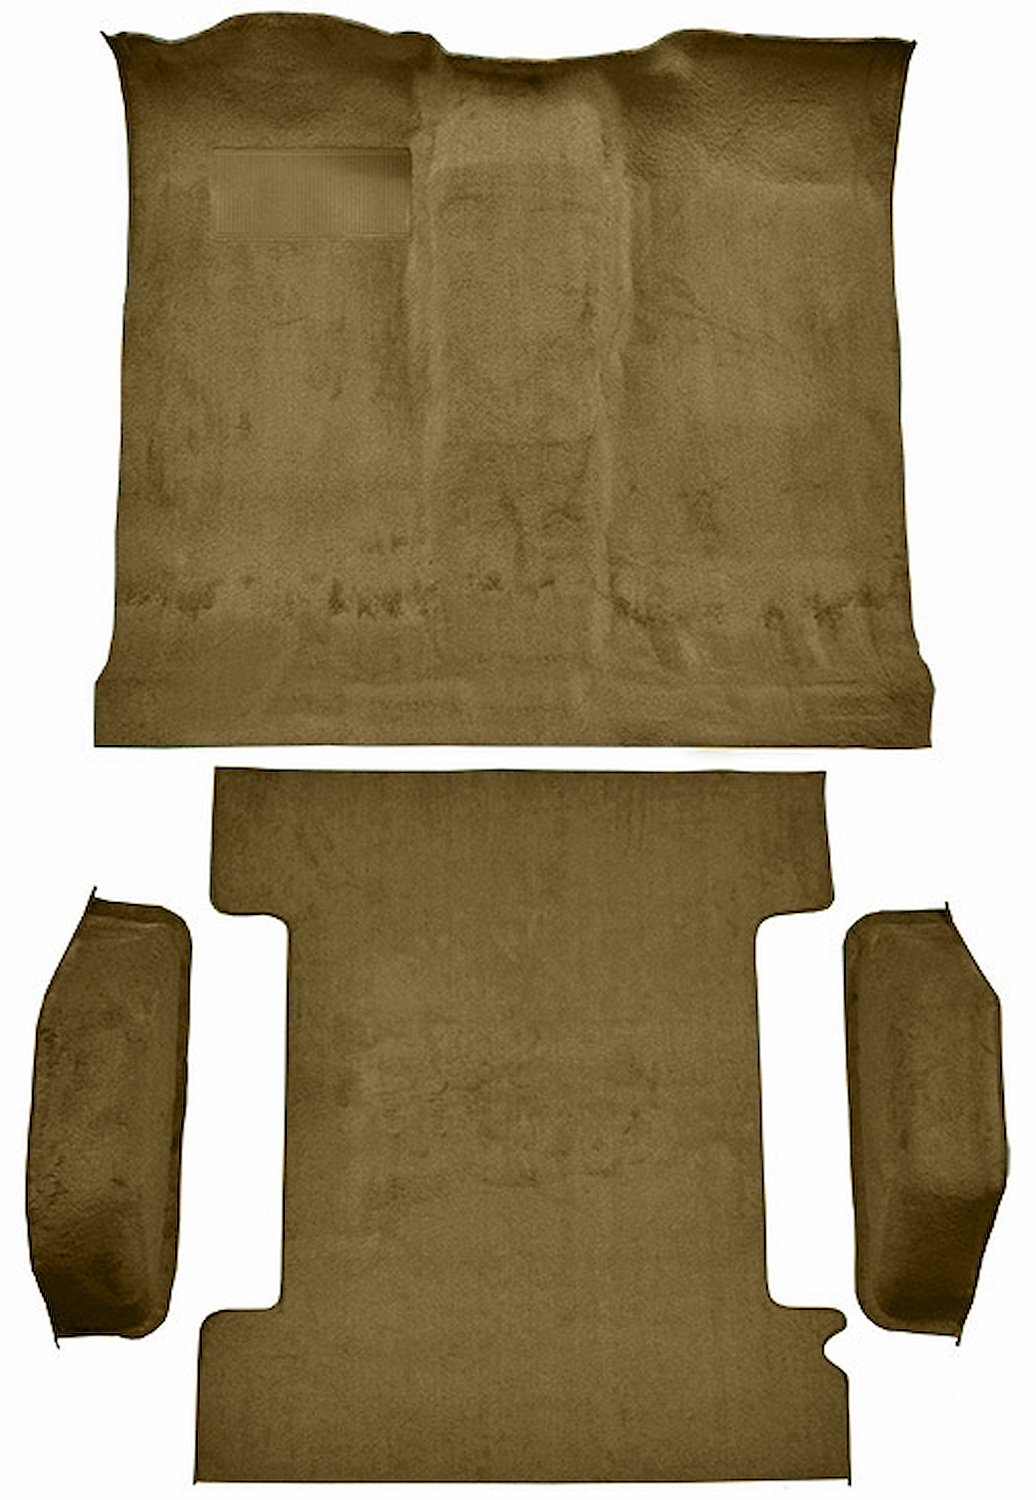 Molded Cut Pile Passenger and Cargo Area Carpet for 1974-1977 Chevy Blazer, GMC Jimmy [OE-Style Jute Backing, 4-Piece, Caramel]